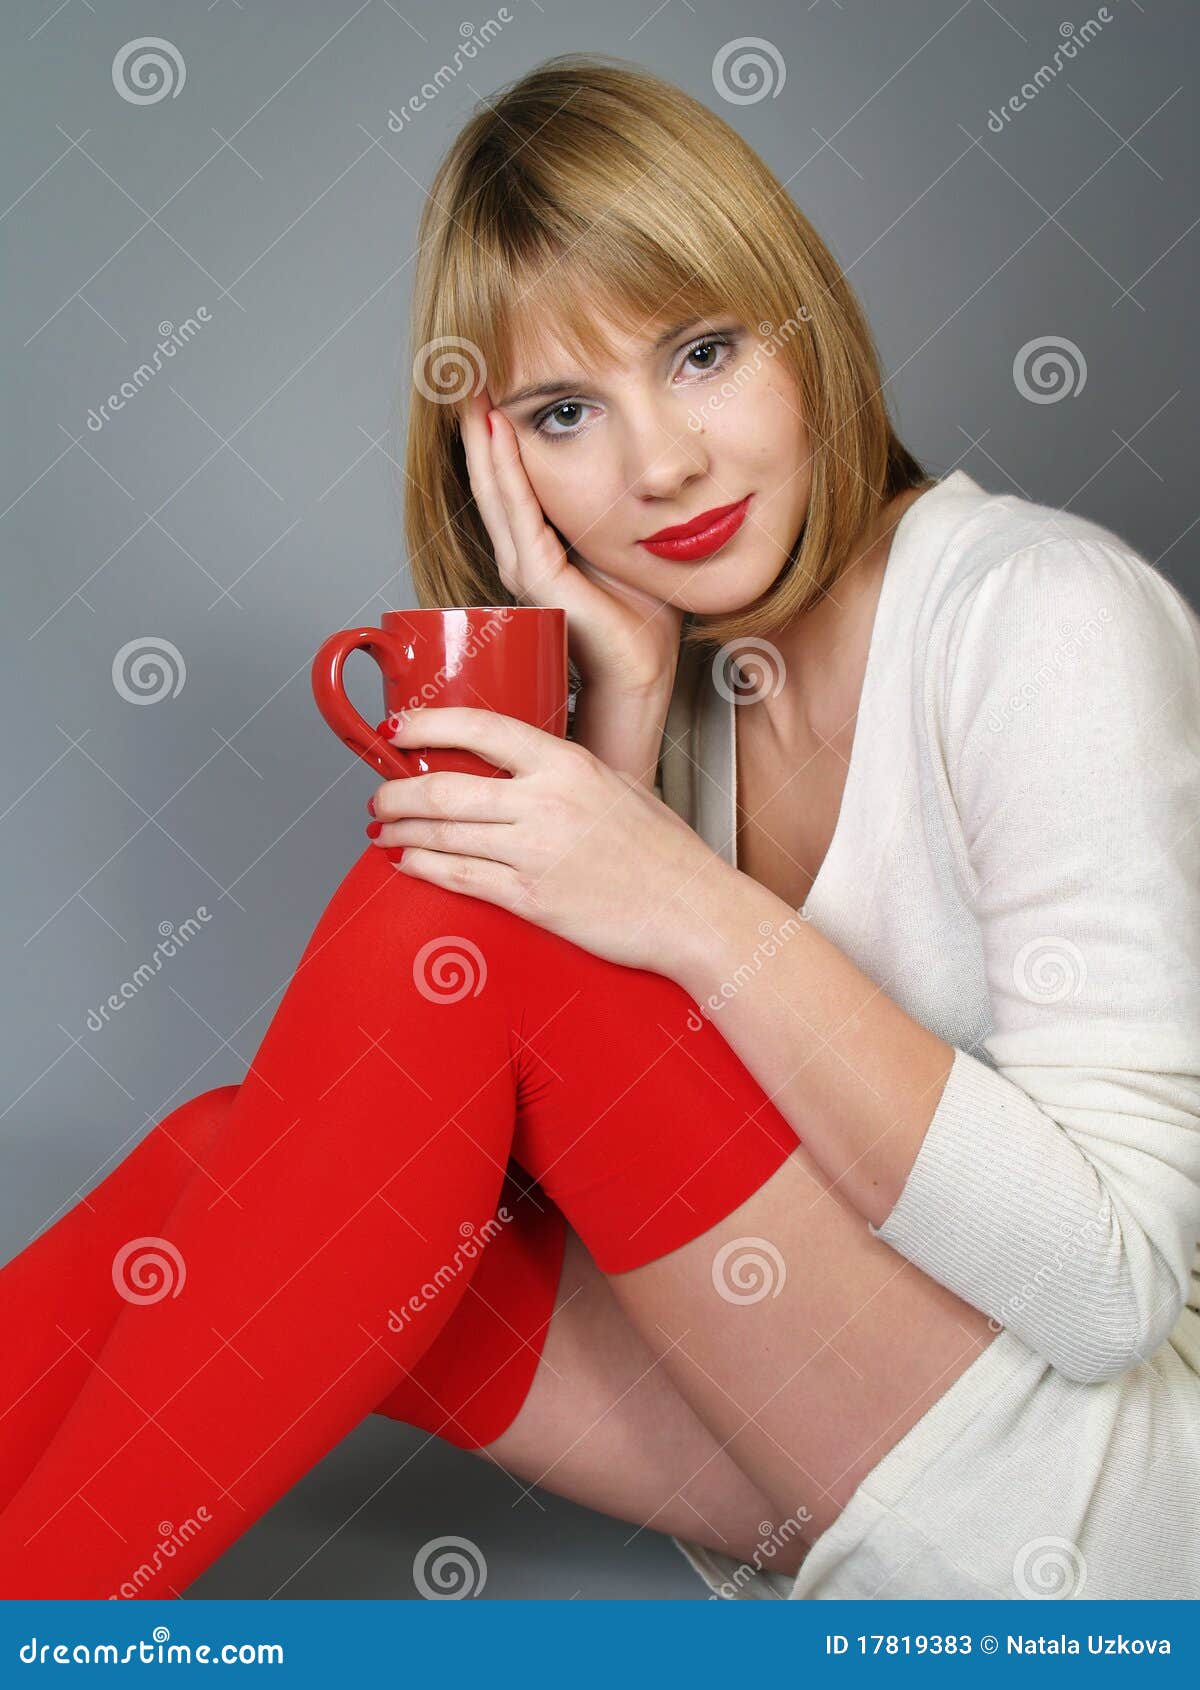 Girl In Red Stockings With A Mug Stock Image Image Of Female Beautiful 17819383